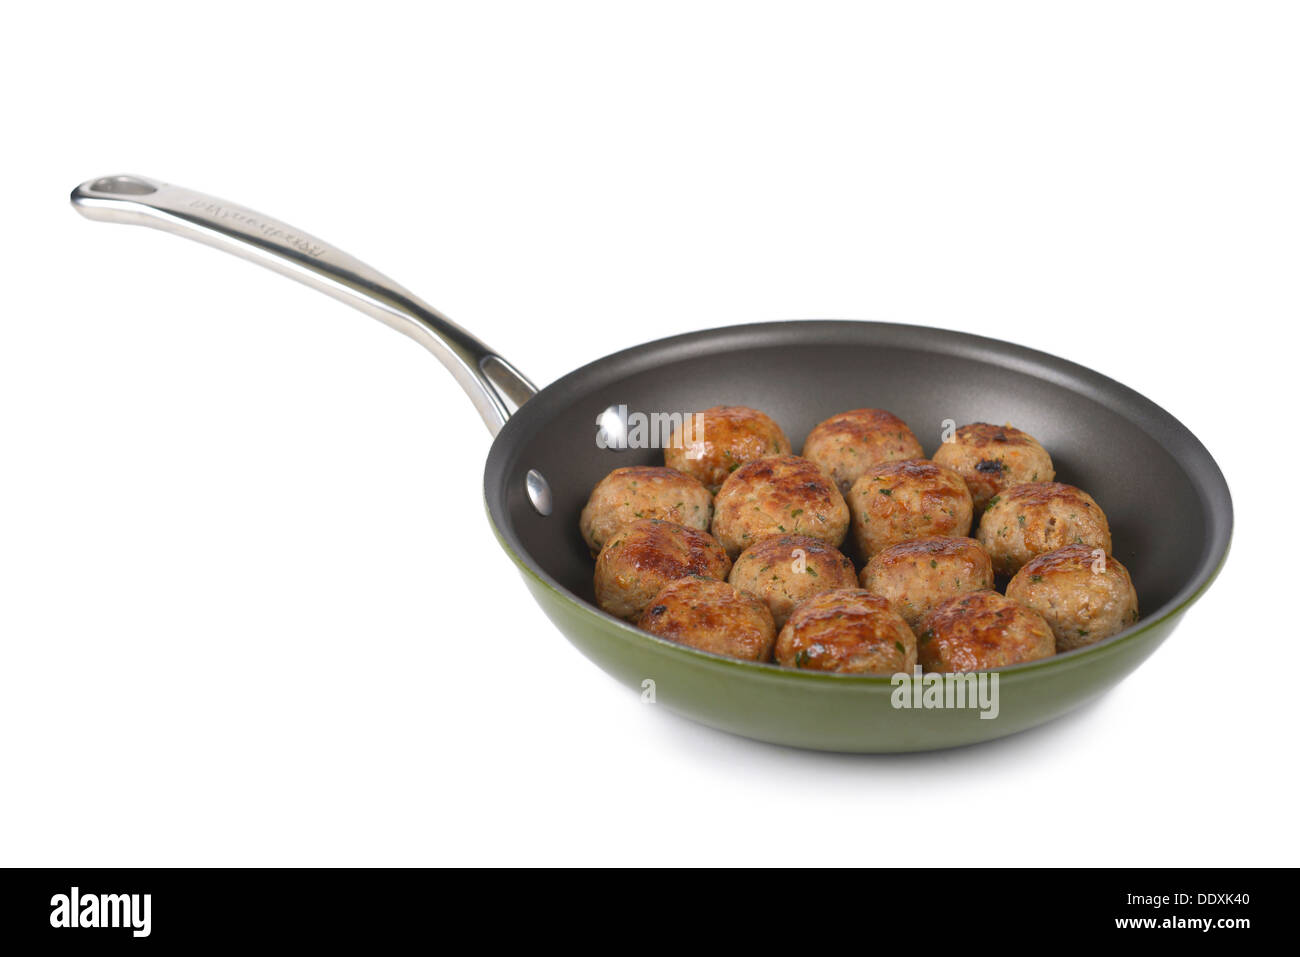 Meatballs, Fried, Browned, Frying Pan Stock Photo